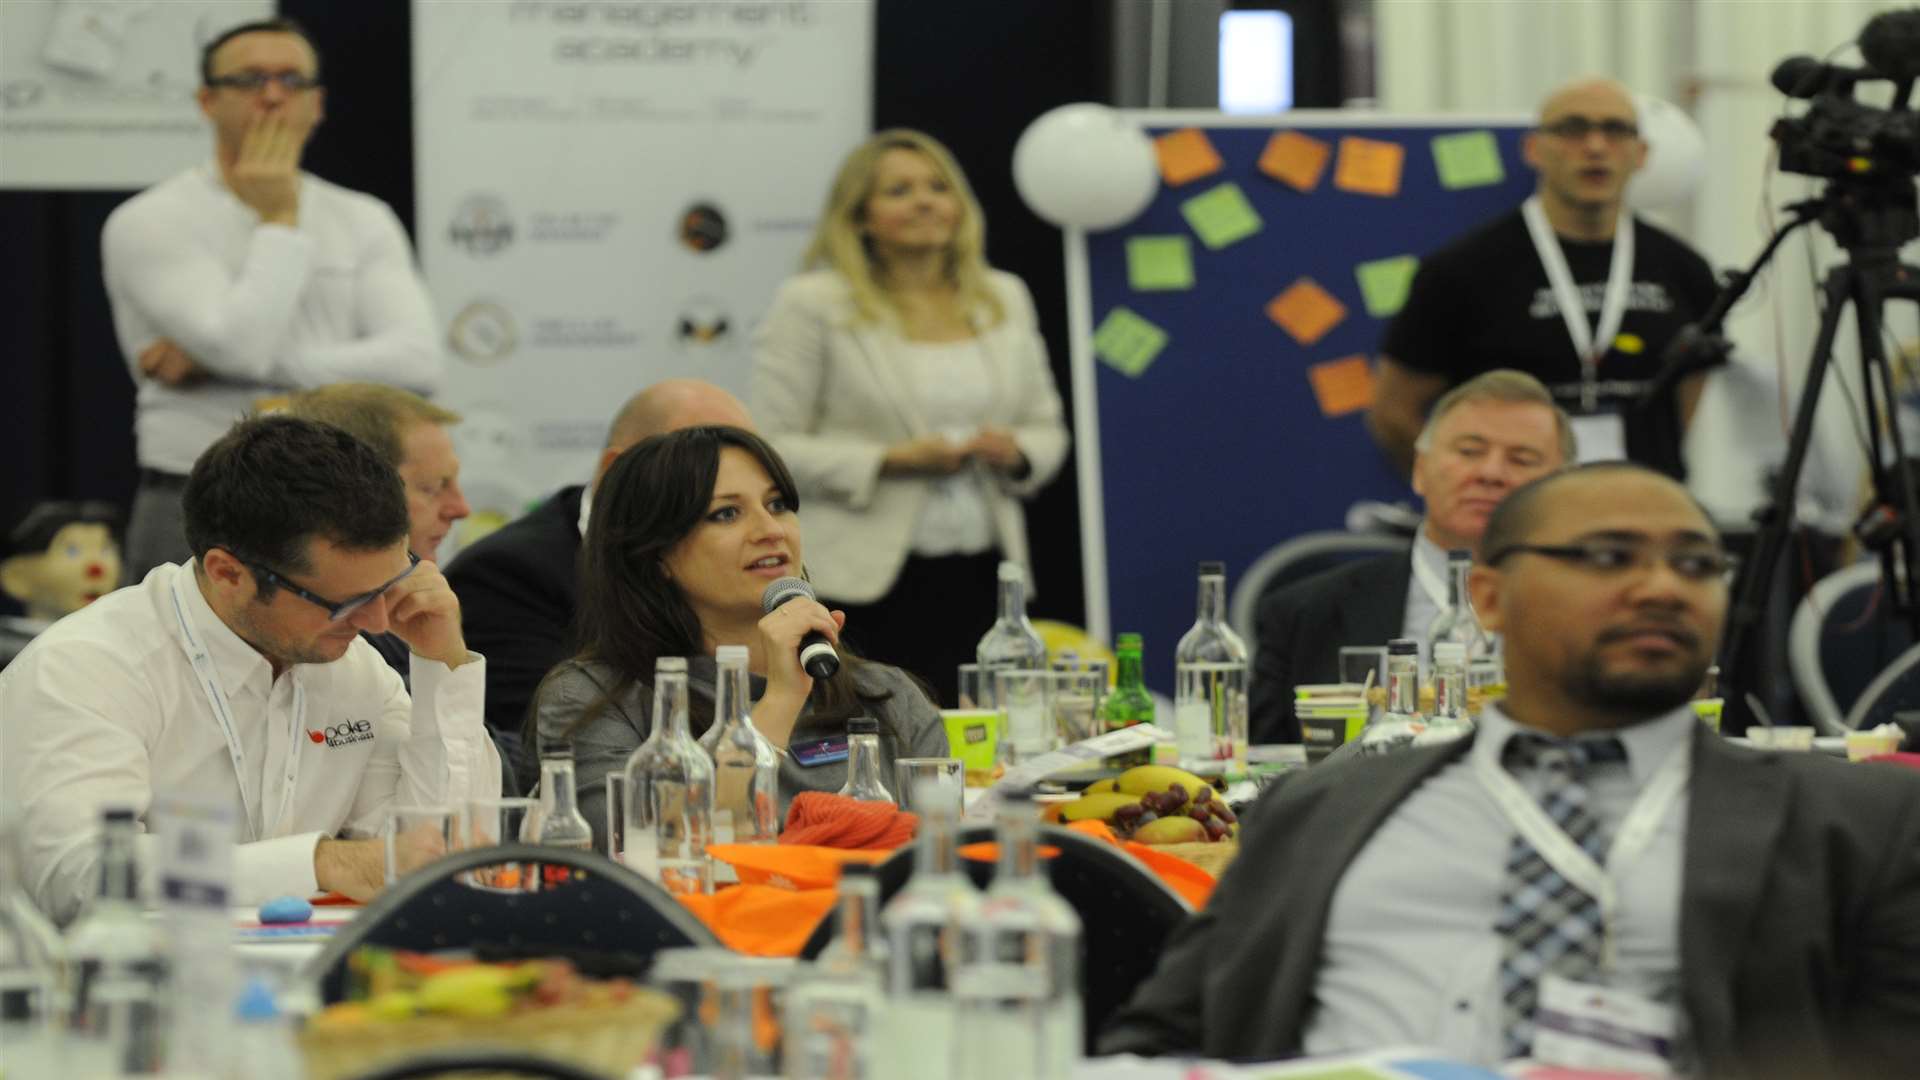 Wellbeing Symposium was set up to show companies how they can keep their workforce healthy